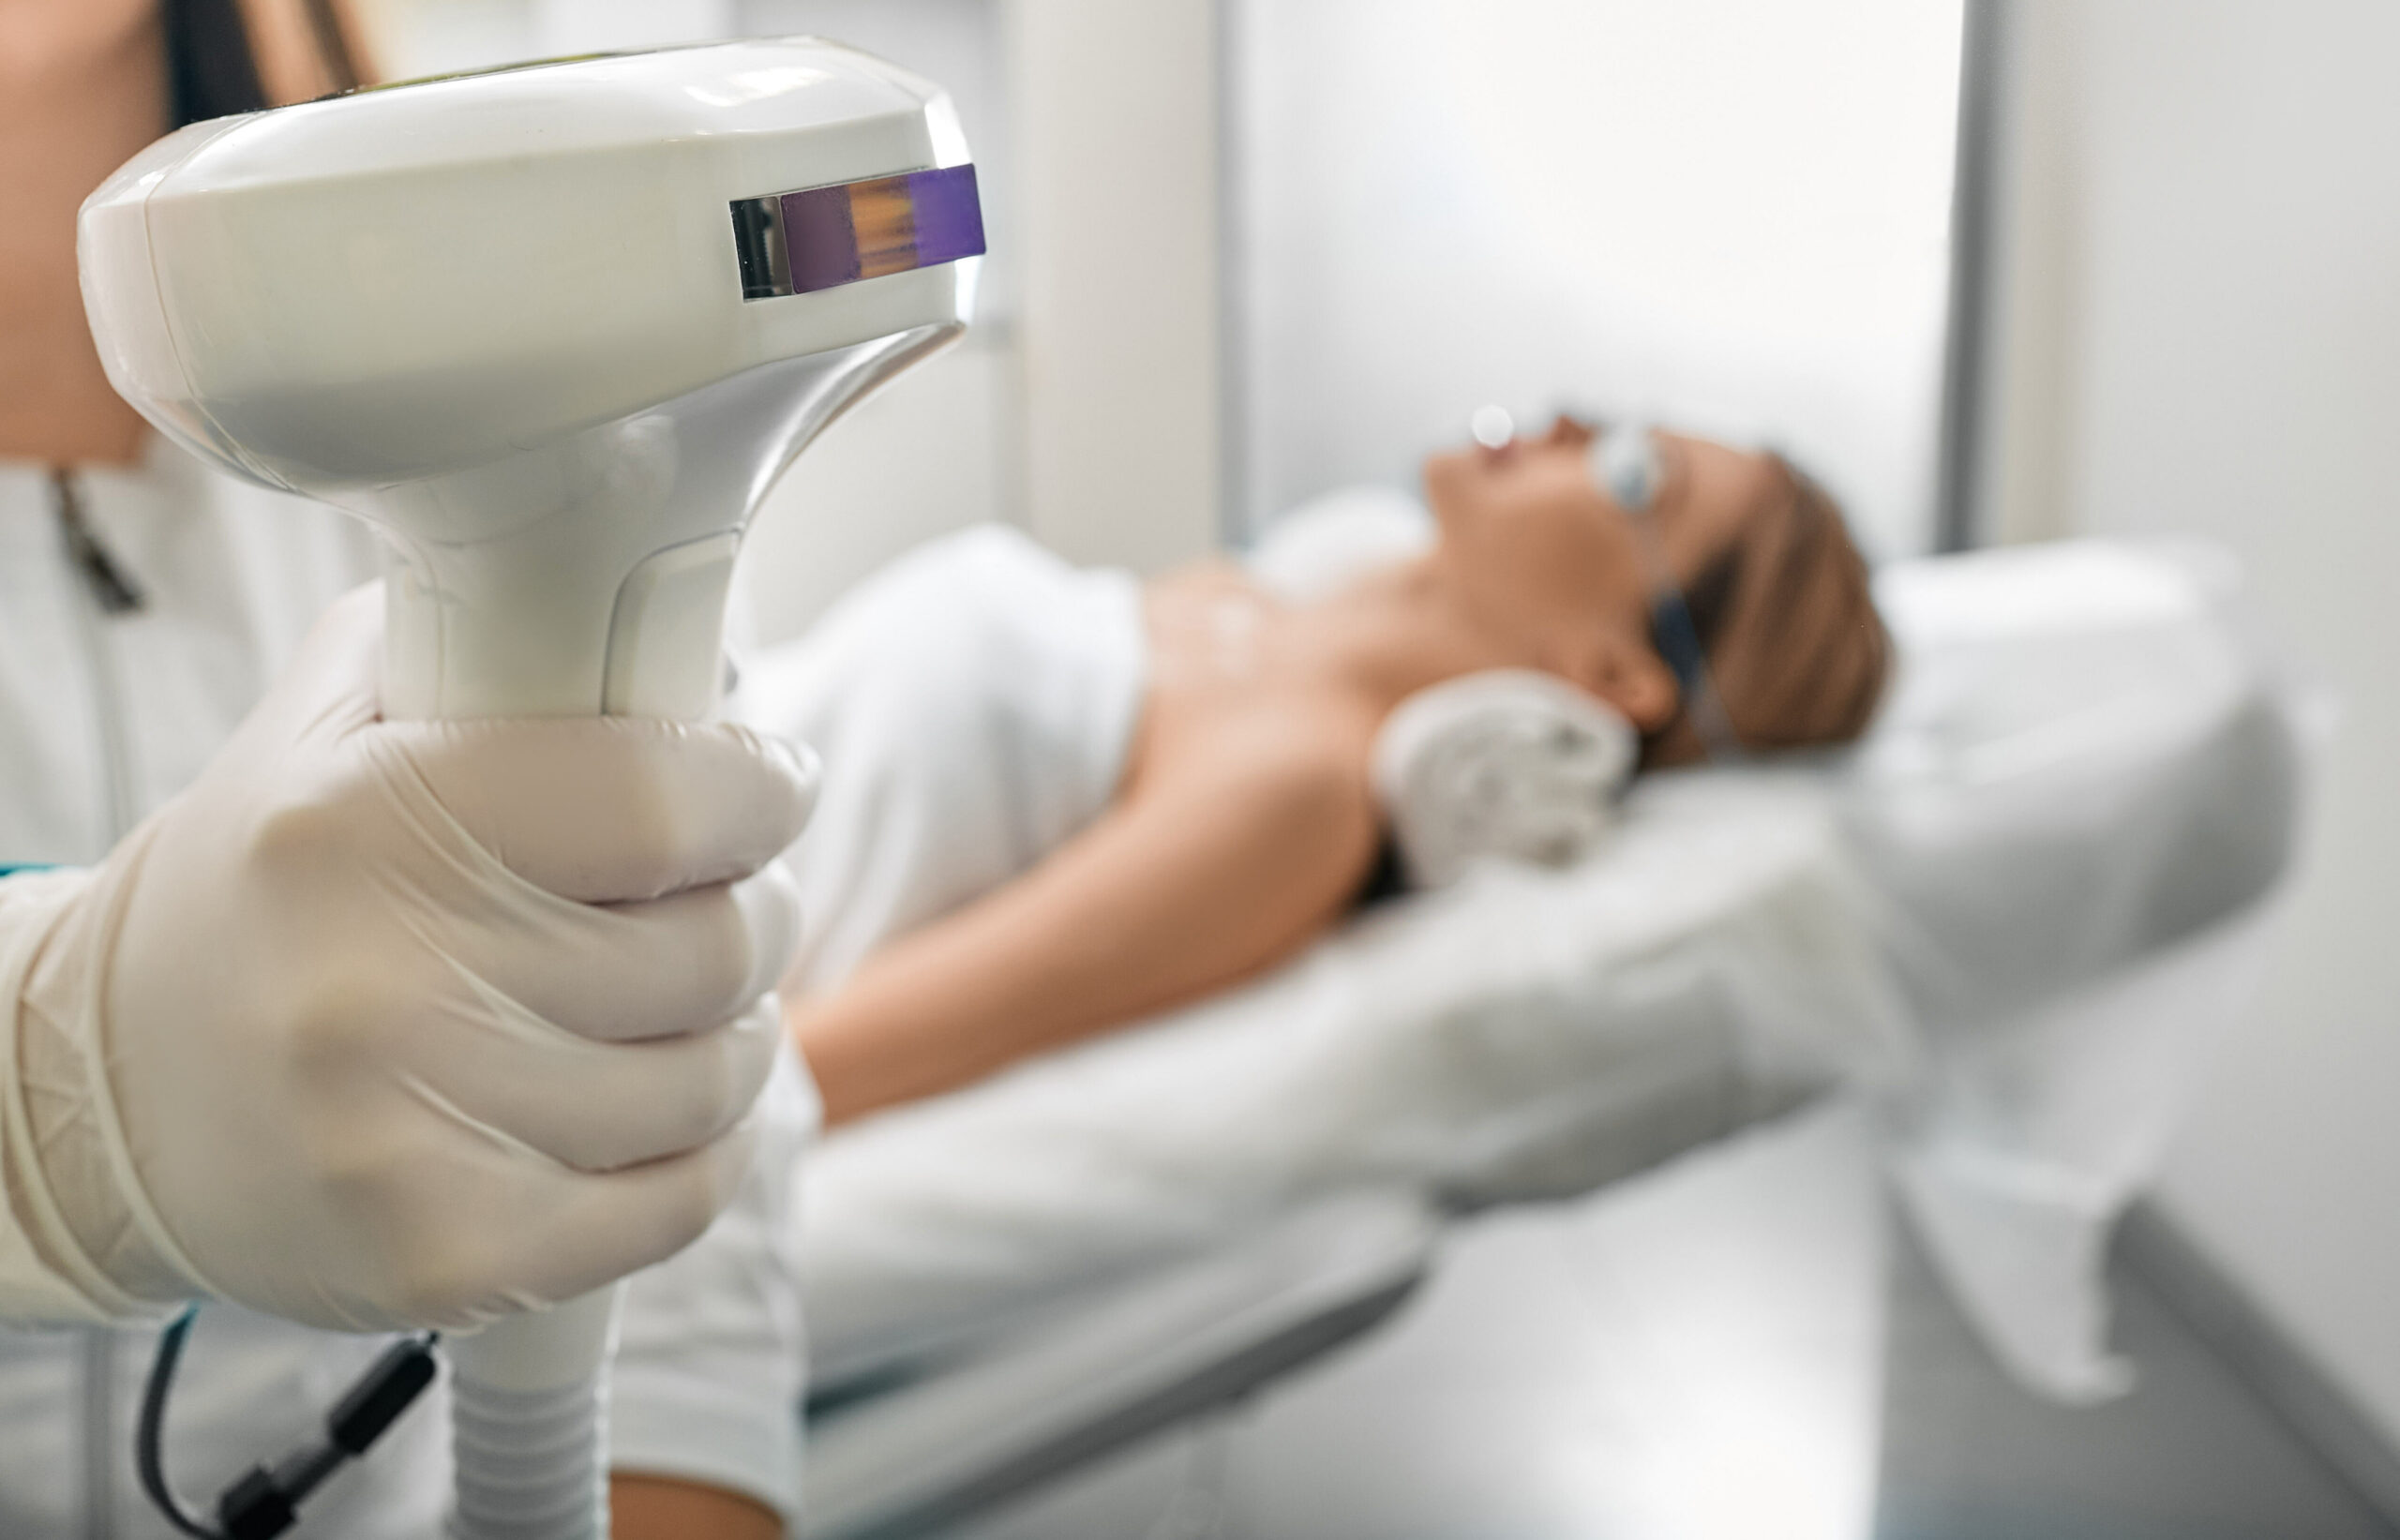 Beautician holding Lumecca device with intense pulsed light IPL technology for photorejuvenation of a woman's body and removal of brown spots and freckles, close-up | RefineKC Aesthetics in Kansas City, MO